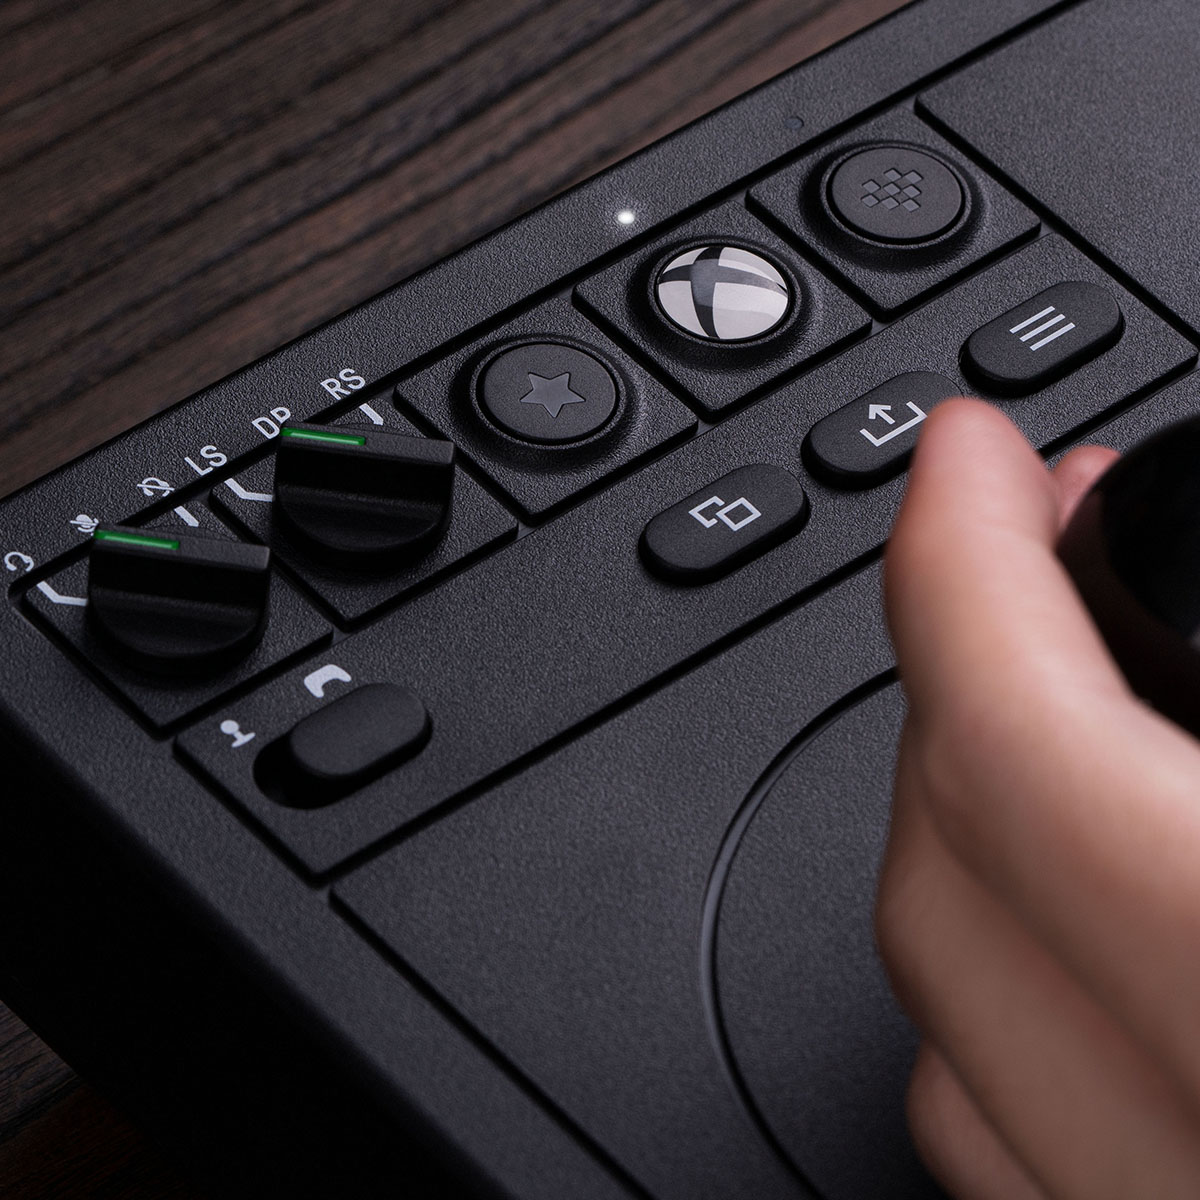 8BitDo Arcade Stick for Switch vs Xbox Review – Features, Ease of Modding,  Price, and More – TouchArcade